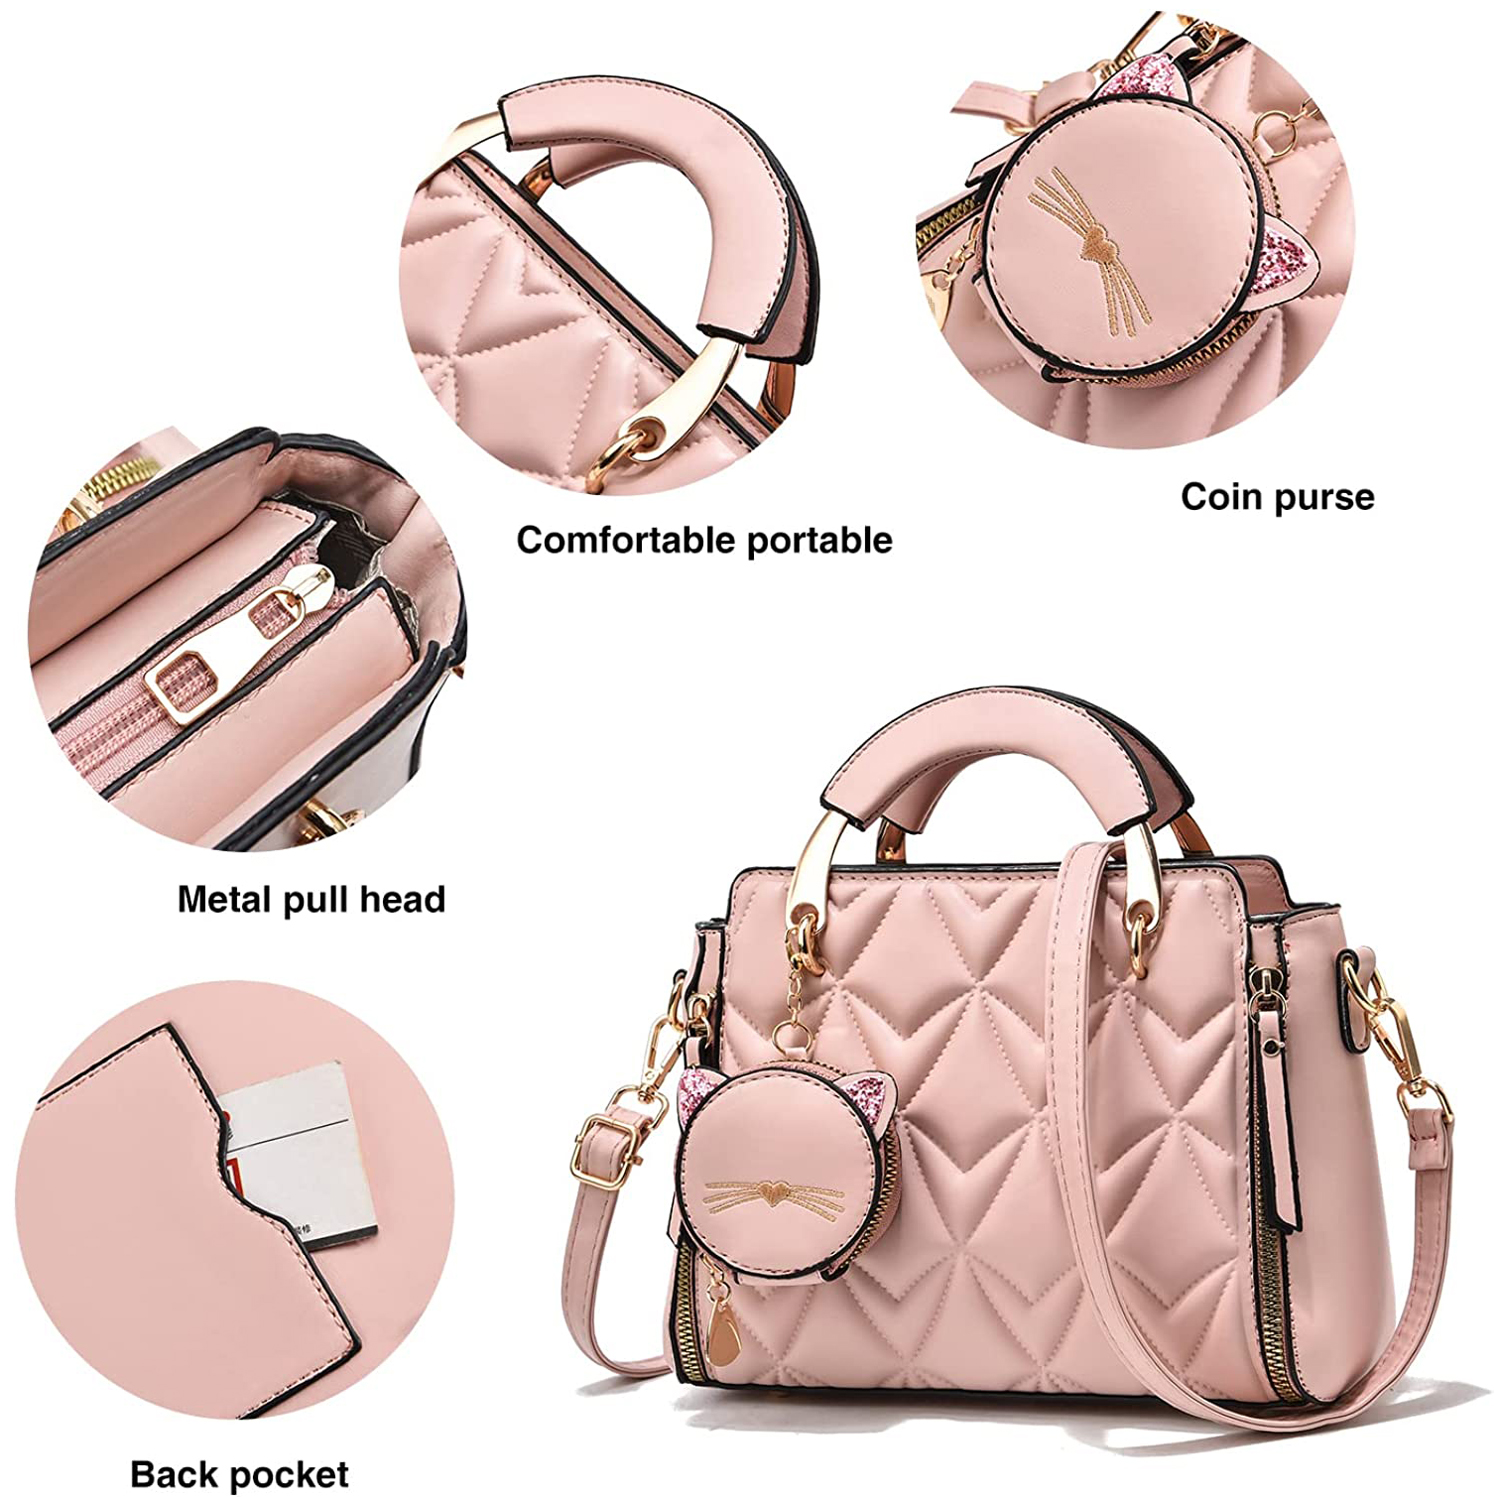 Large Purses for Women Shoulder Handbags Large Crossbody Cute Bag for Women with Small Purses,Pink - image 5 of 9